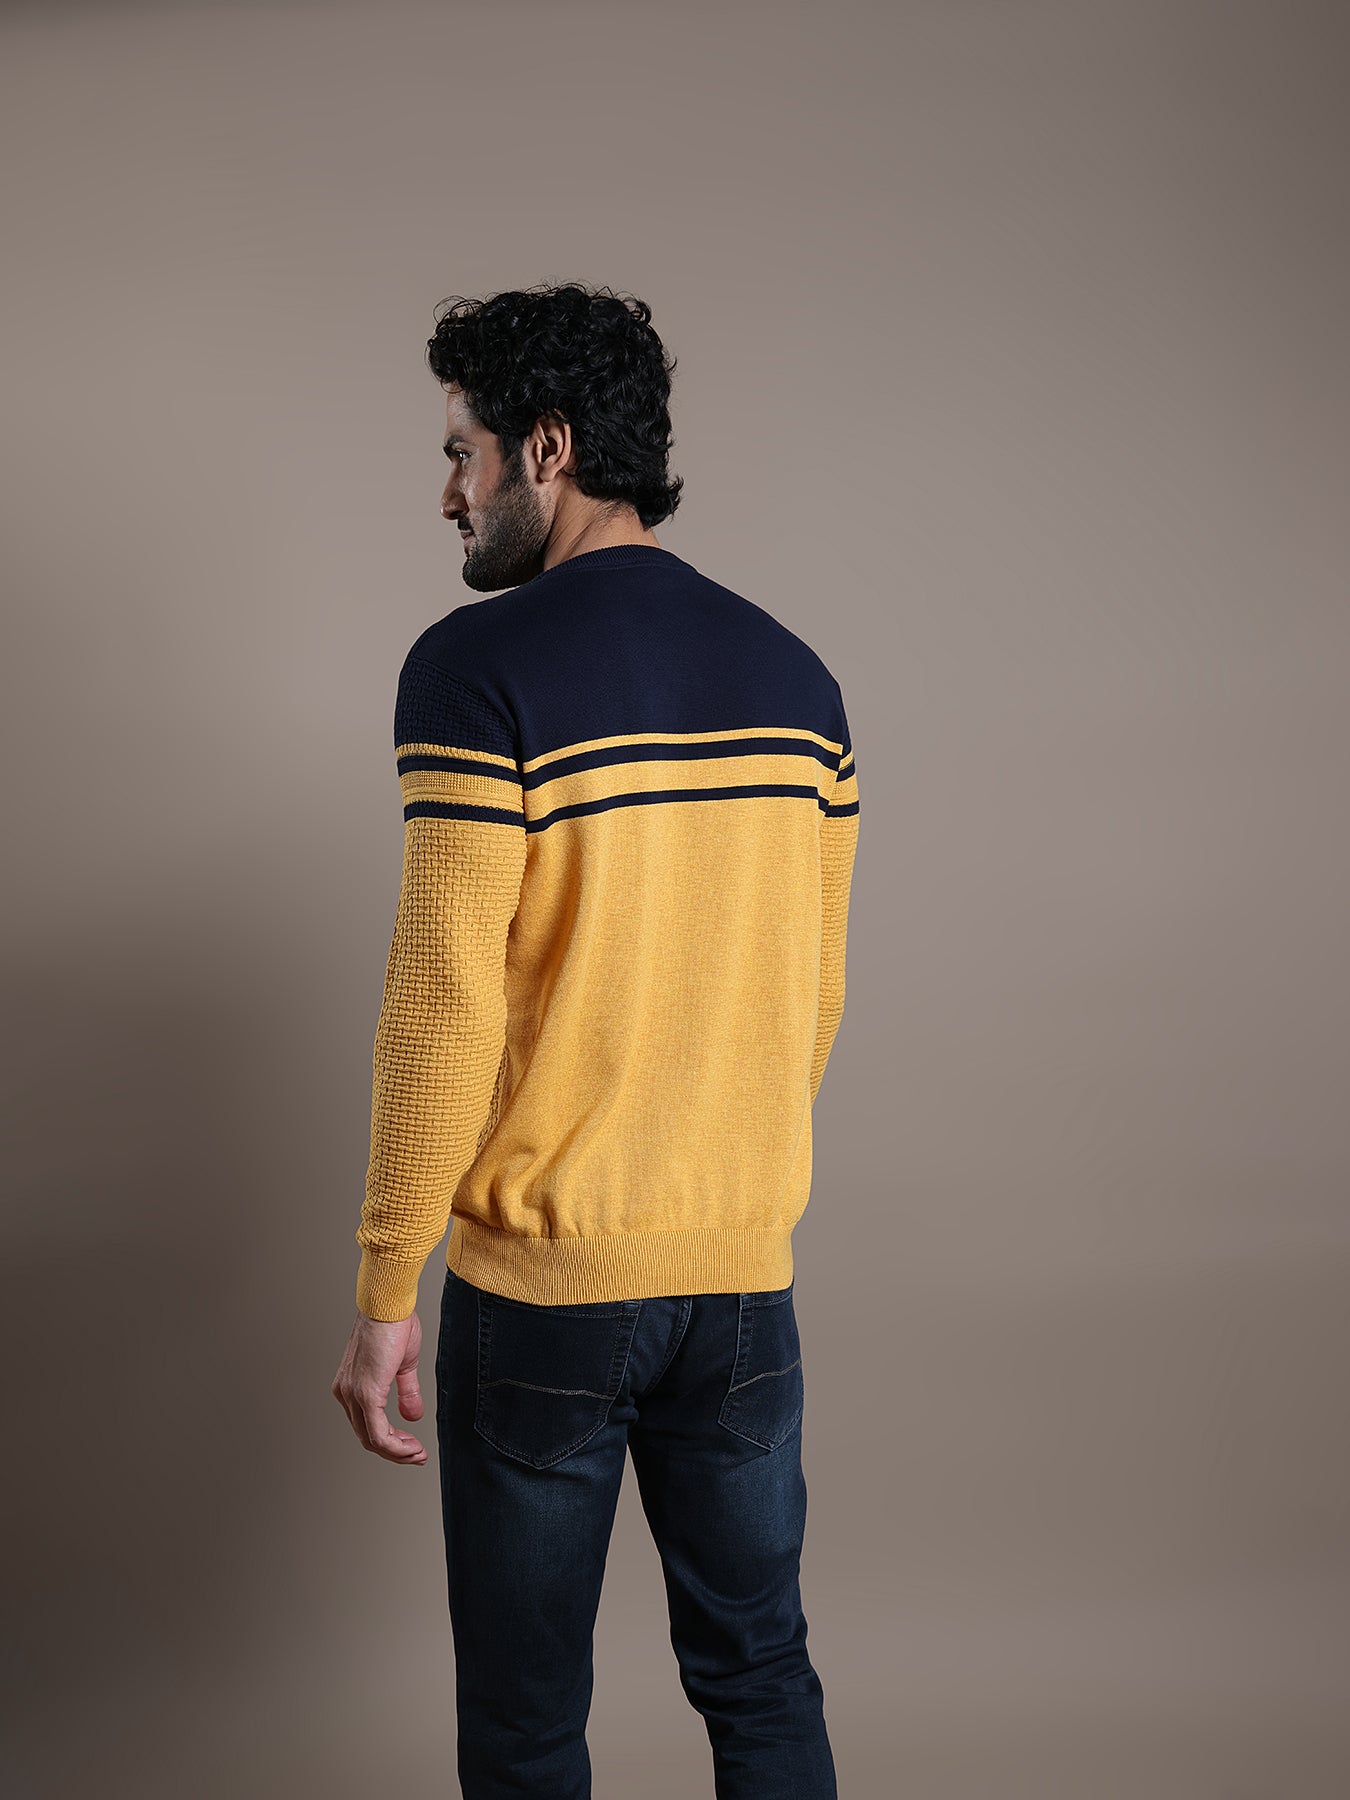 Knitted Mustard Yellow Striped Regular Fit Full Sleeve Casual Pullover